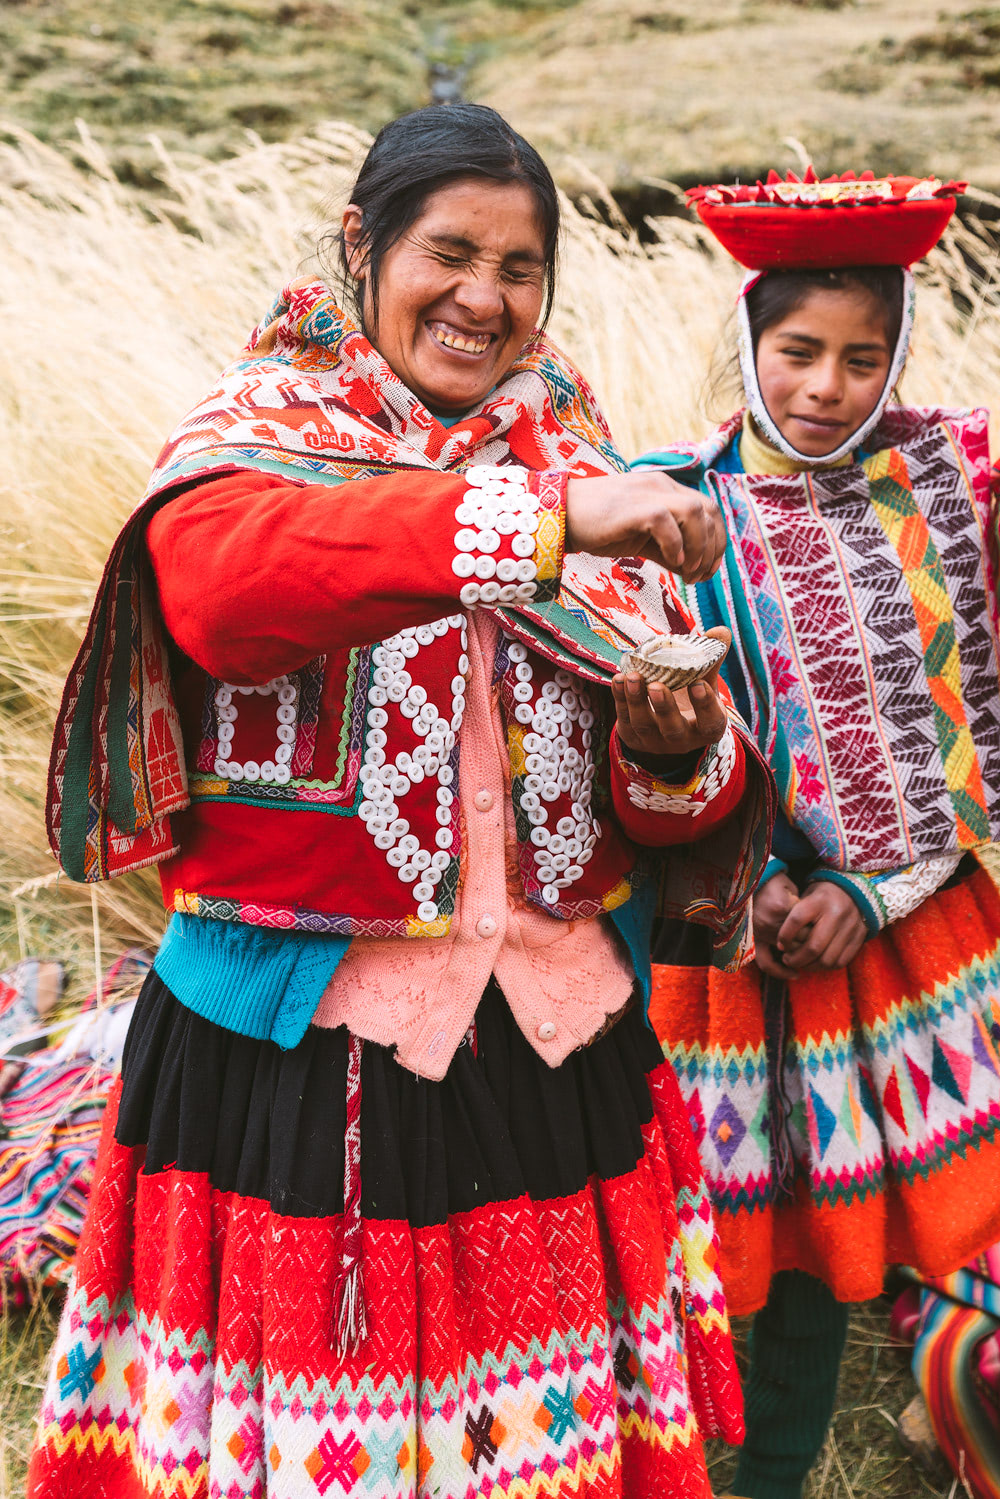 Best-Things-To-Do-In-And-Around-Cusco-Peru-Llama-Blessing4